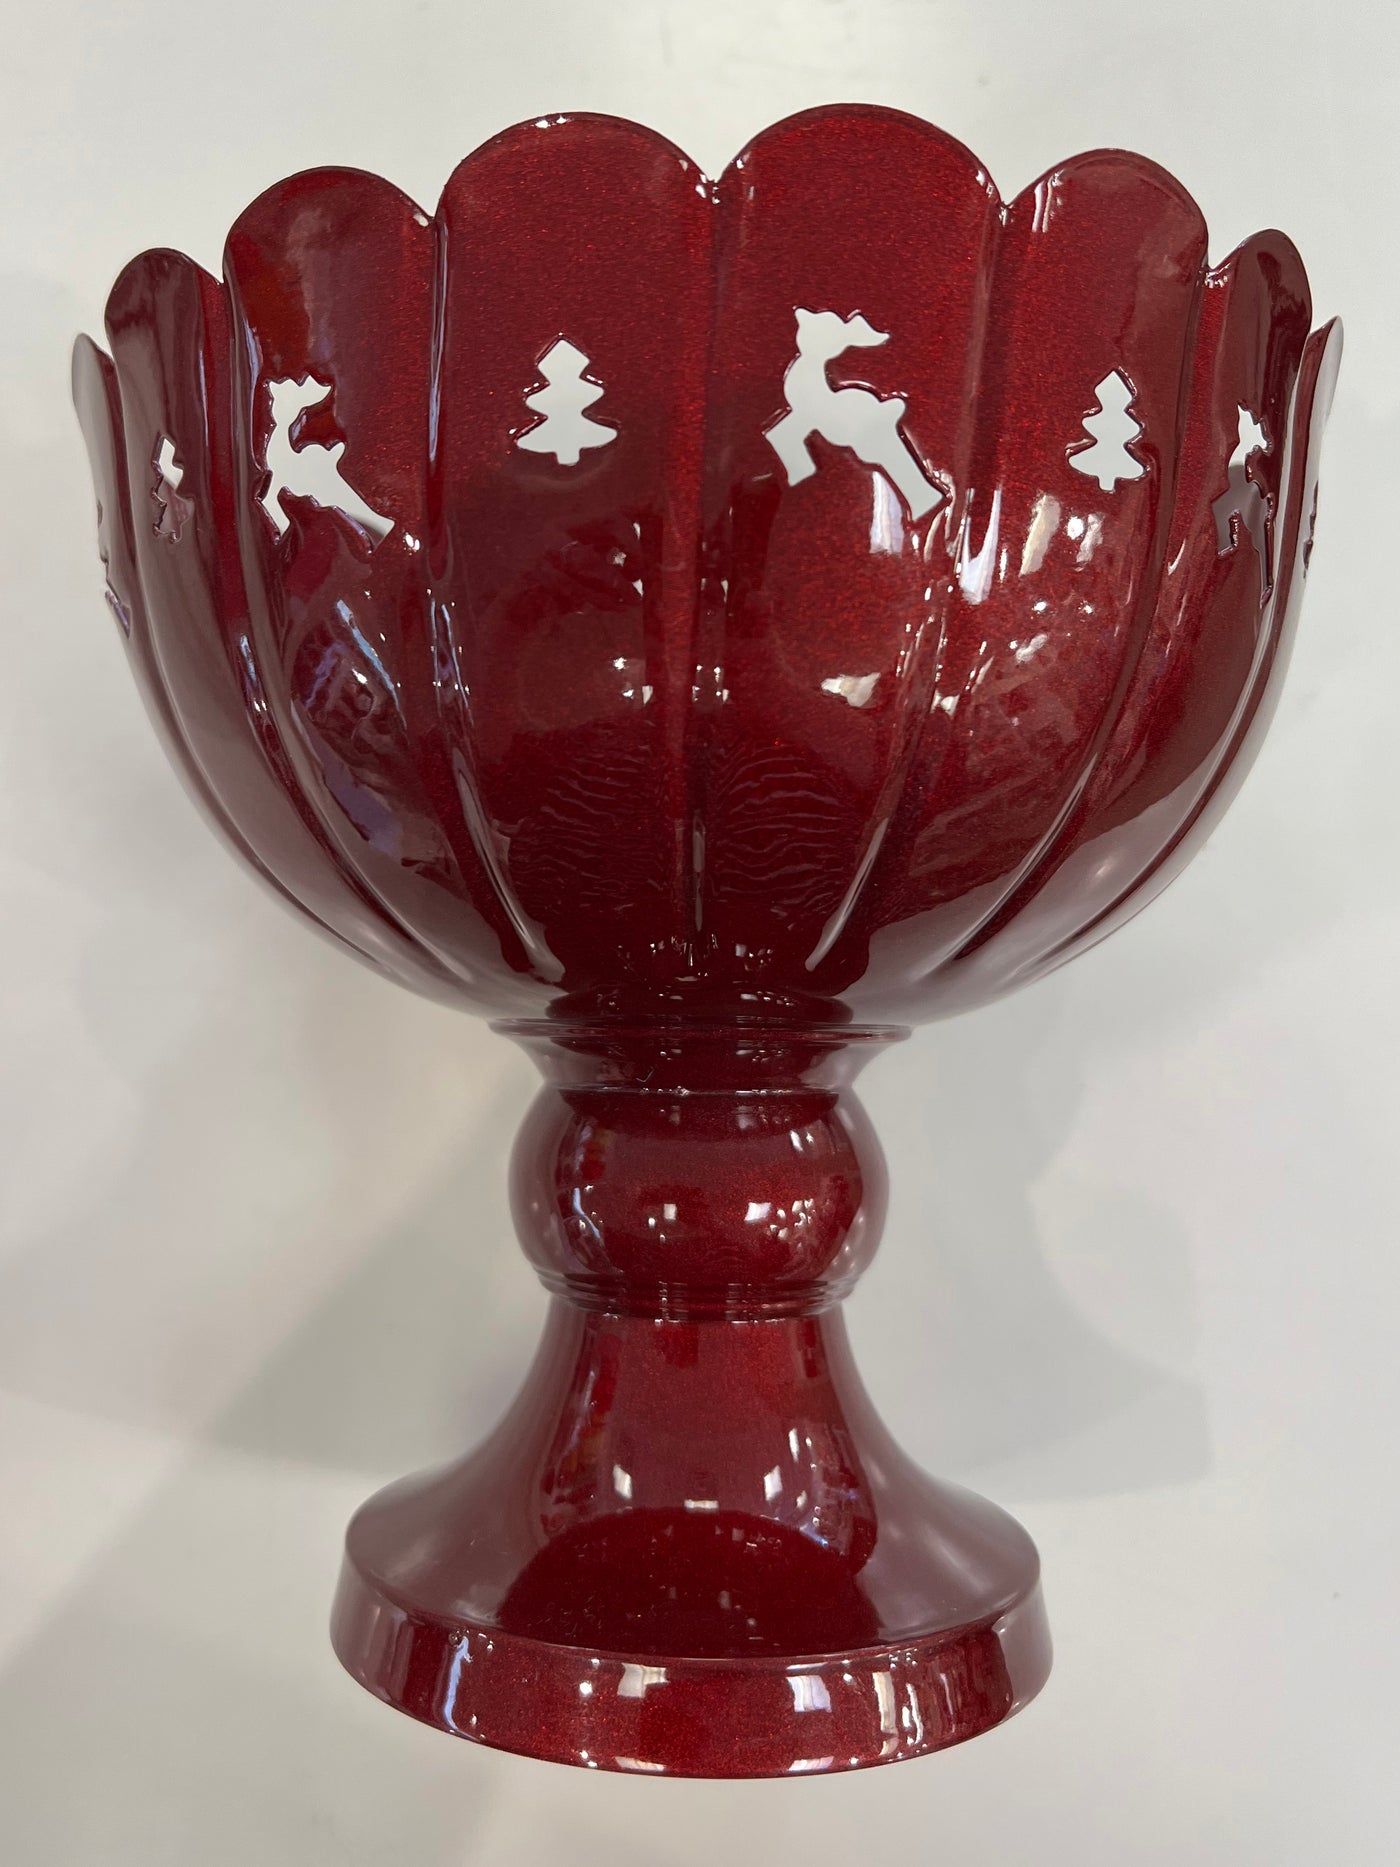 JMD Footed Bowl, Ruby Red